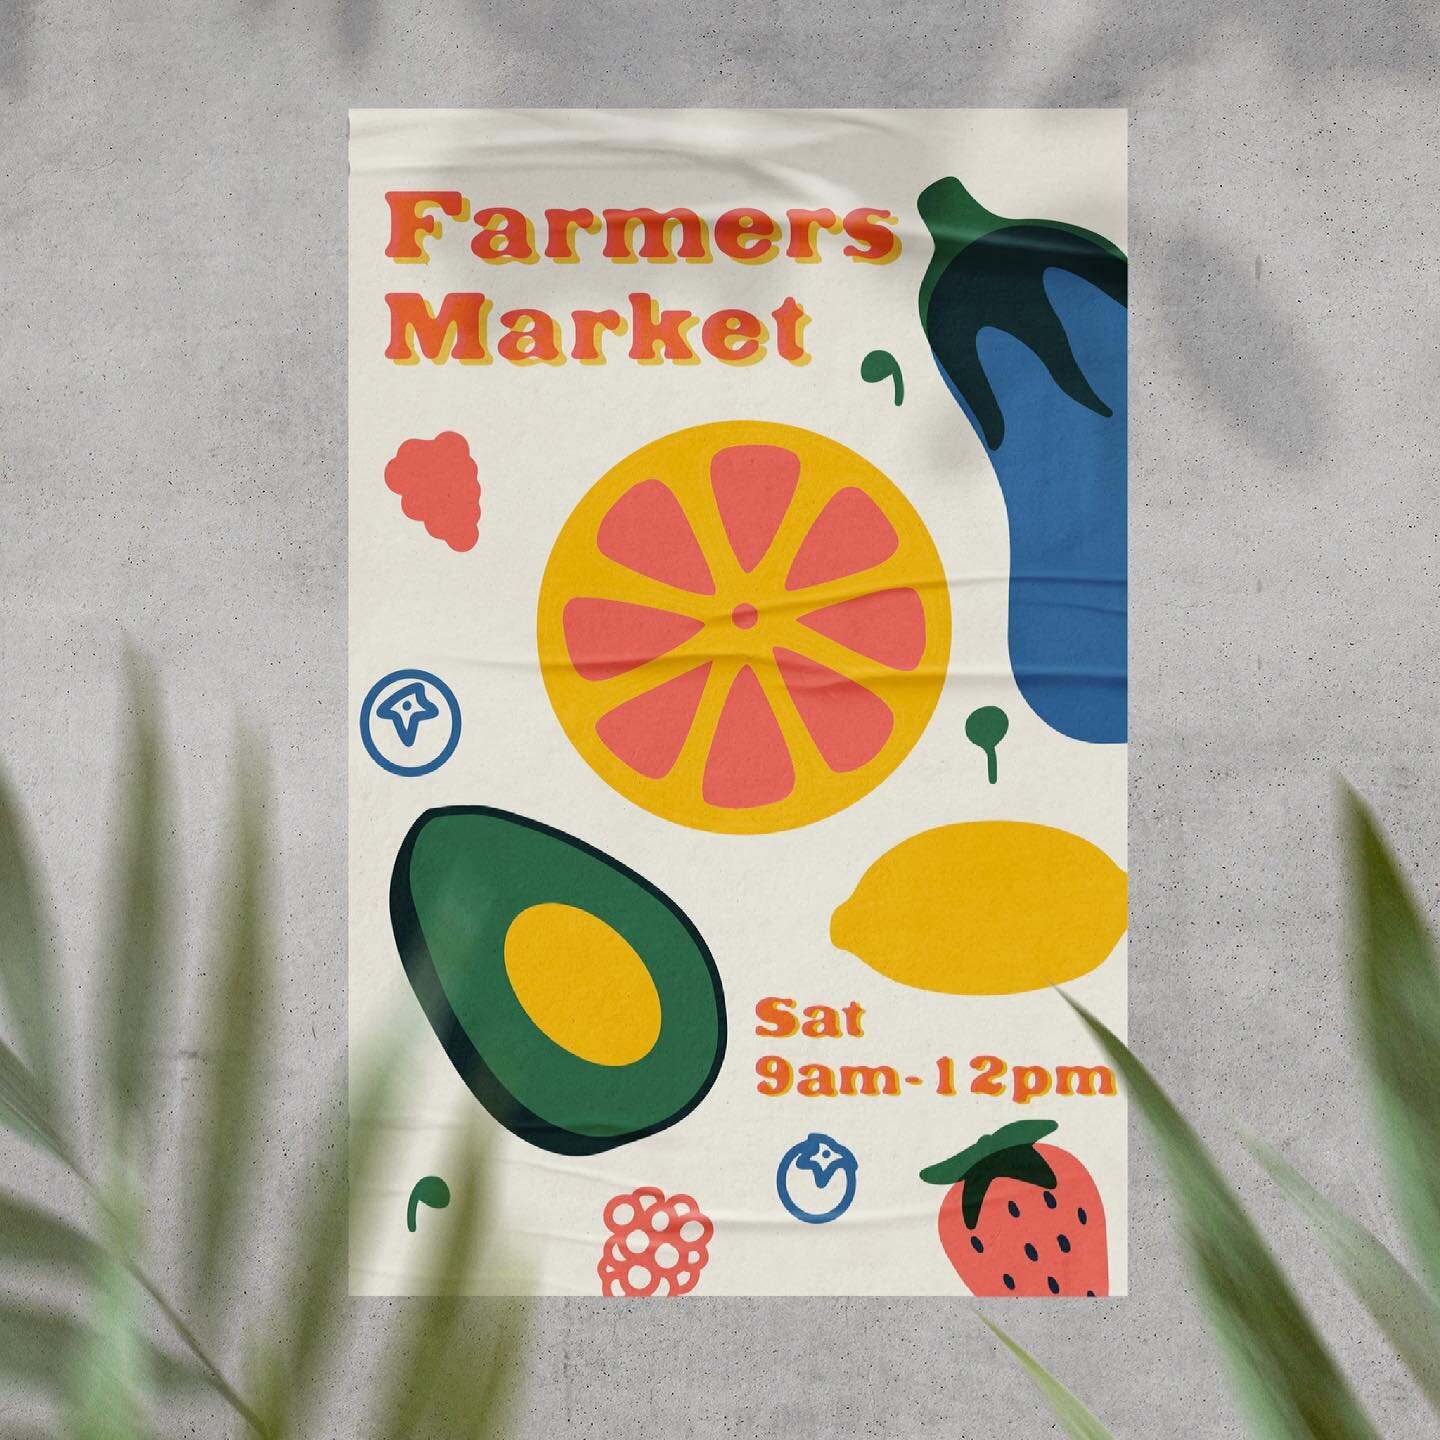 Farmers market poster inspired by my favorite local farmers market @ptreefarmersmkt I am super passionate about buying local organic produce and farmers markets are the best way to do that! More designs to come on this concept. 
-
Shoutout to my grea